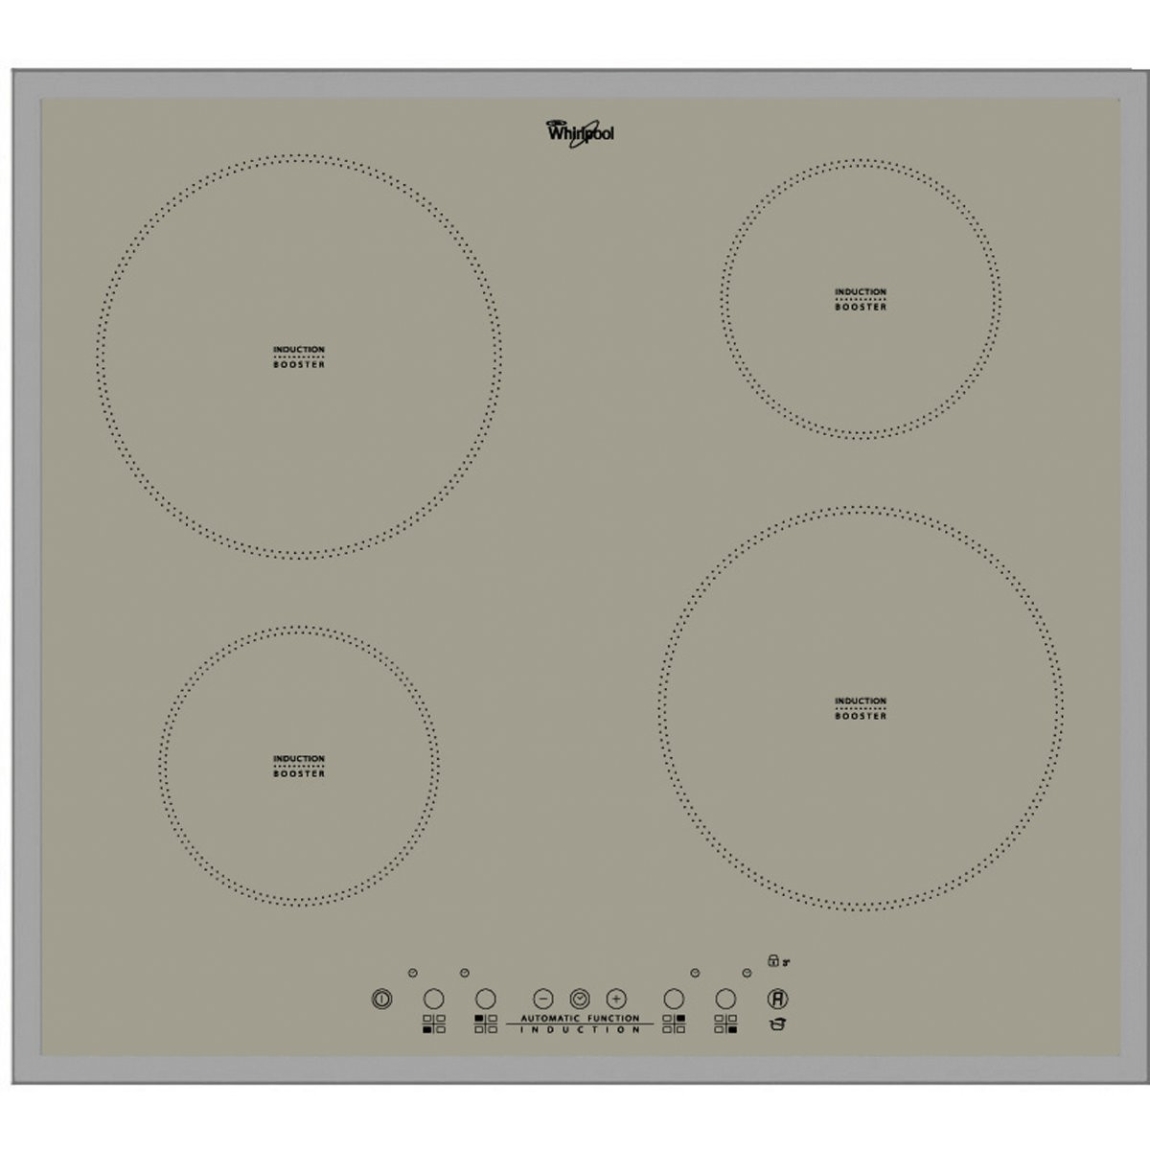 4 Zone Induction Hob in Silver ACM 804 BA S Whirlpool Electrical Hobs / Induction Cooker Electrical Hobs / Induction Cooker Choose Sample / Pattern Chart